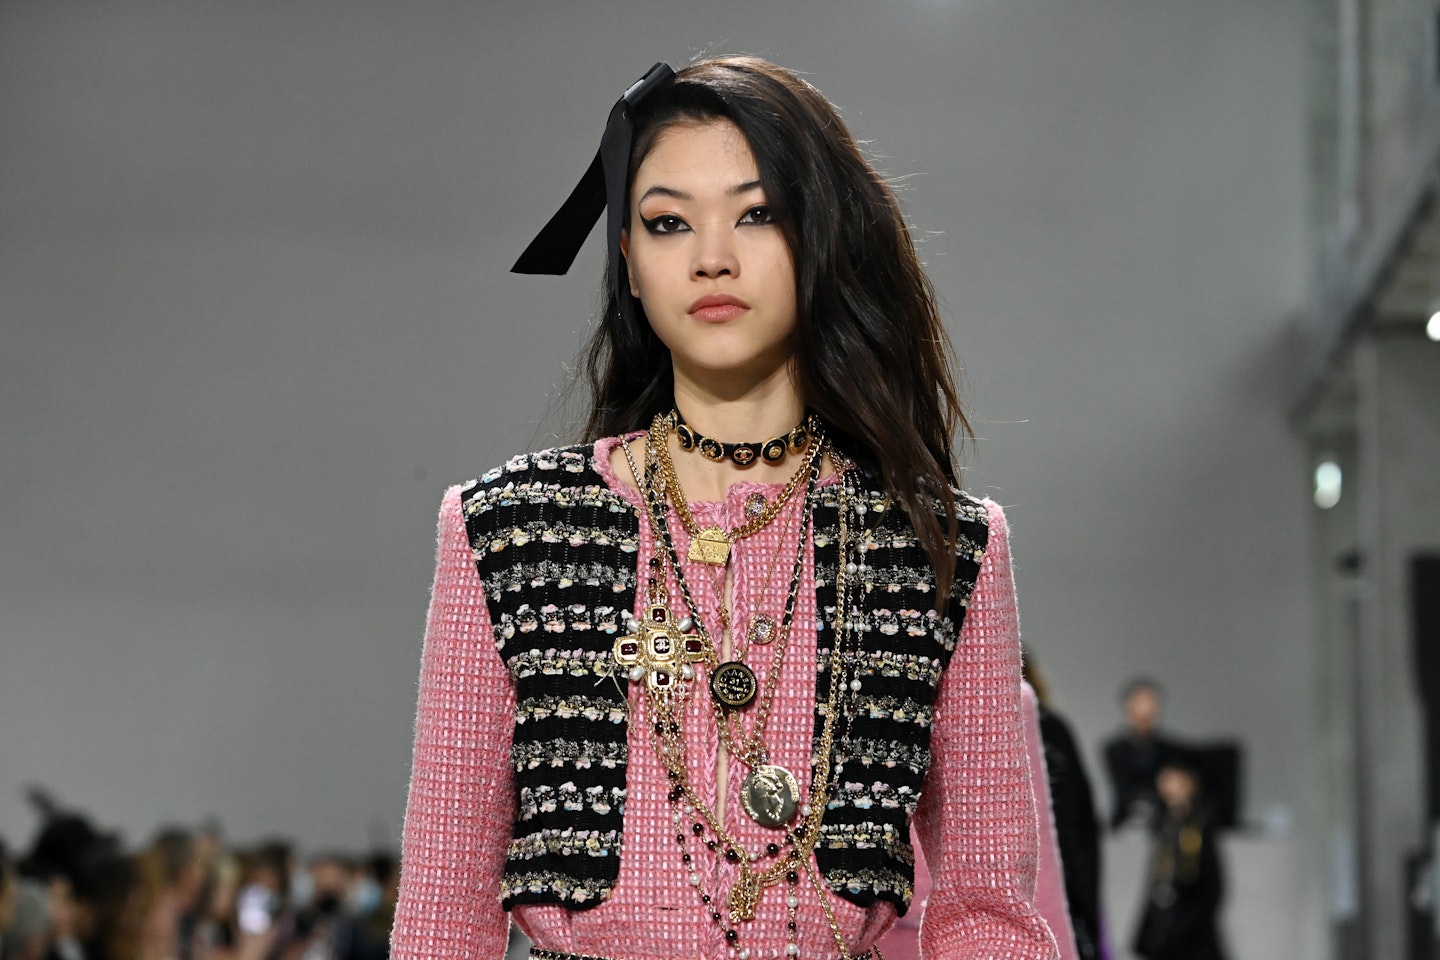 A model on the catwalk at Chanel's Métiers d’art